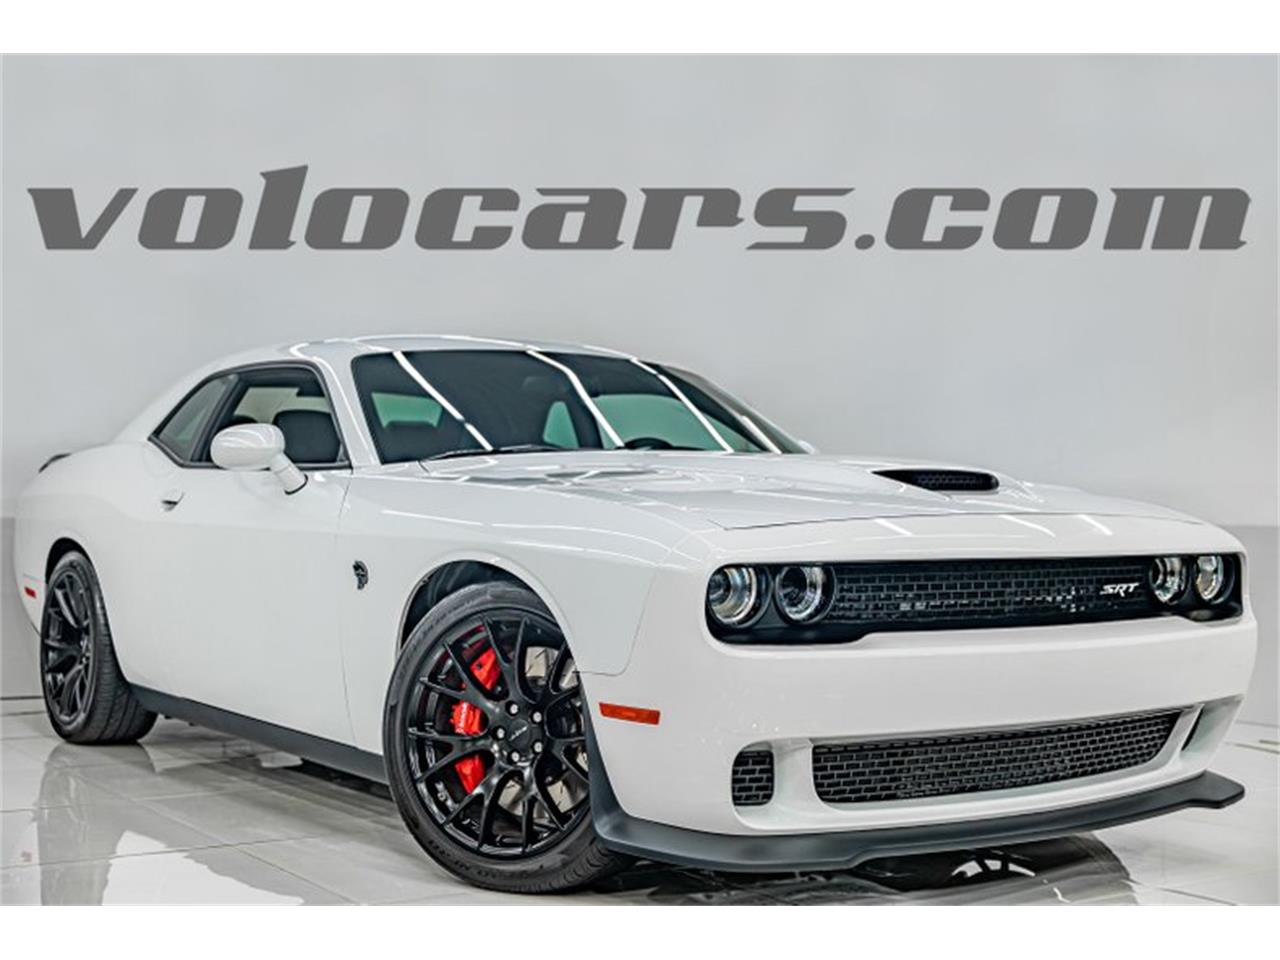 For Sale: 2016 Dodge Challenger in Volo, Illinois for sale in Ingleside, IL